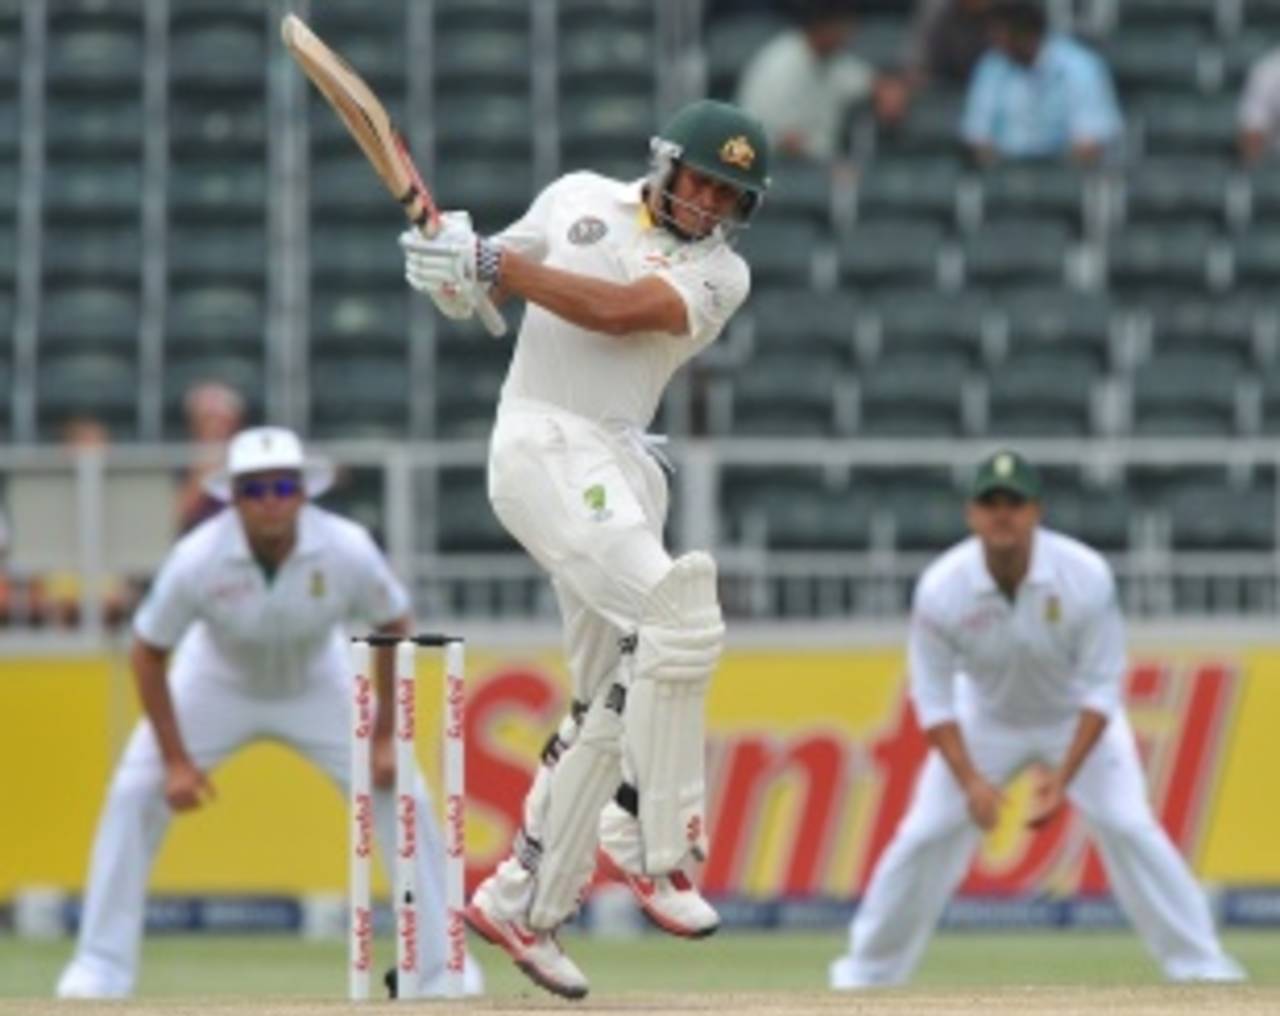 Usman Khawaja pulls during his maiden Test fifty, South Africa v Australia, 2nd Test, Johannesburg, 4th day, November 20, 2011